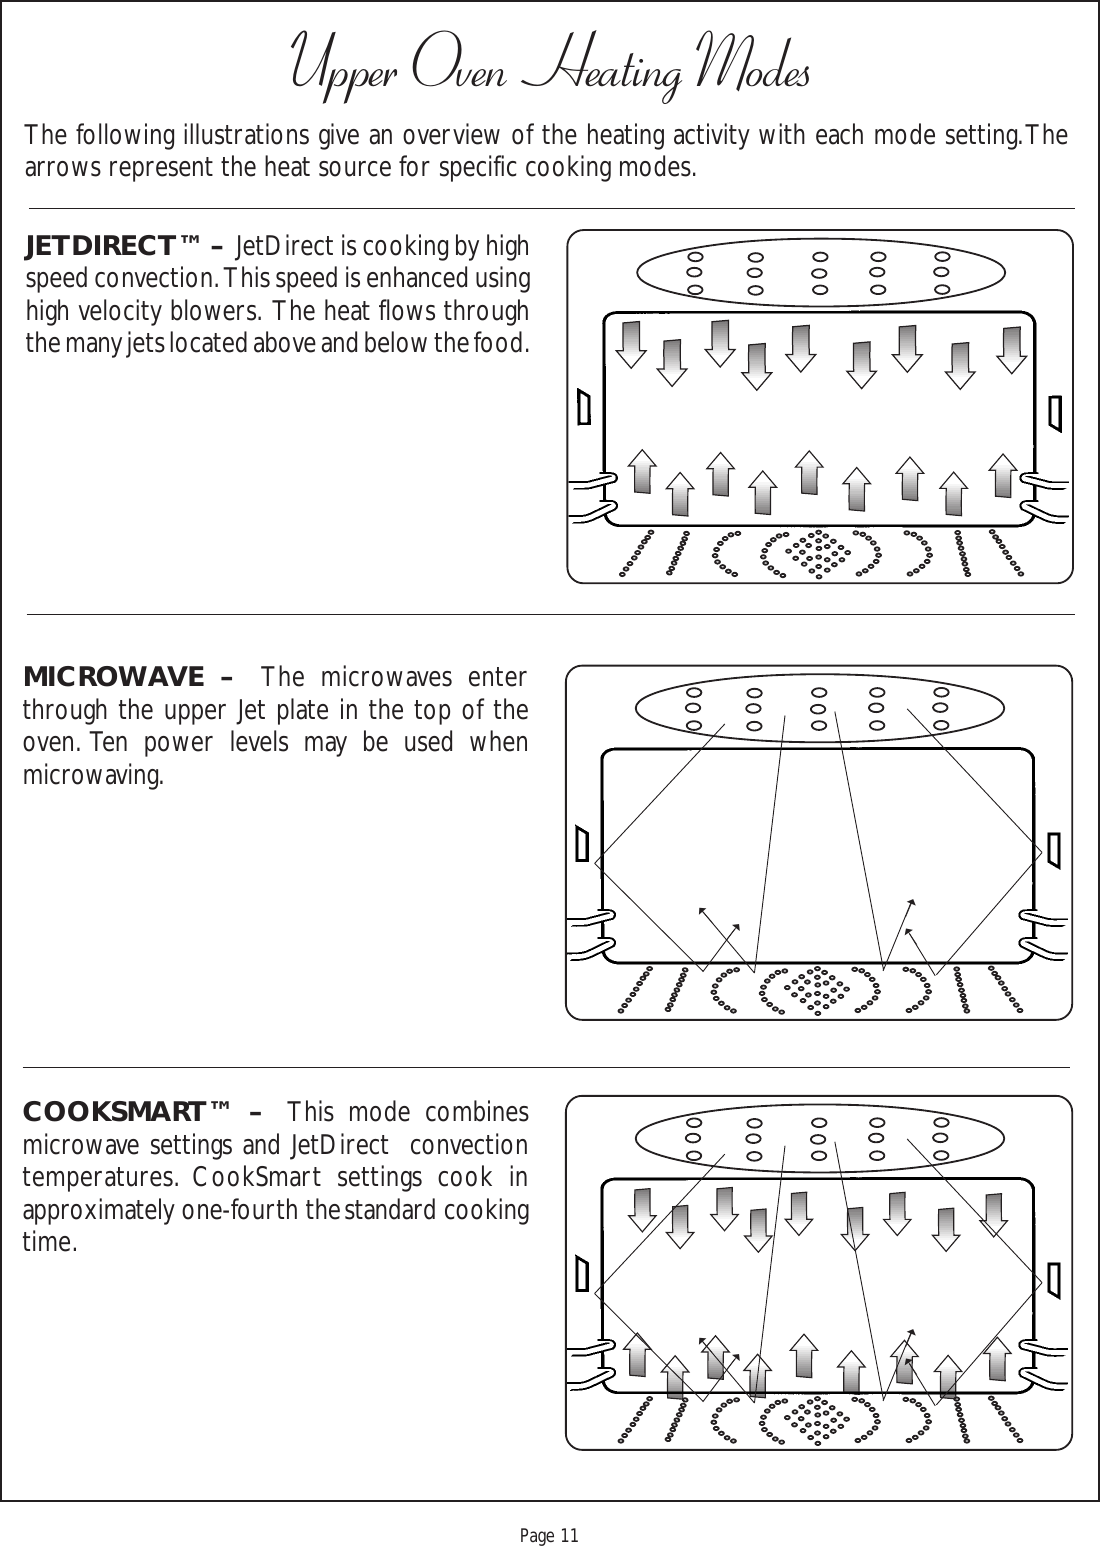 Proof 9-21-99Page 11Upper Oven Heating ModesThe following illustrations give an overview of the heating activity with each mode setting. Thearrows represent the heat source for specific cooking modes.COOKSMART™ –  This mode combinesmicrowave settings and JetDirect  convectiontemperatures. CookSmart settings cook inapproximately  one-fourth  the standard  cookingtime.➝➝➝➝➝➝➝➝MICROWAVE –  The microwaves enterthrough the upper Jet plate in the top of theoven. Ten power levels may be used whenmicrowaving.JETDIRECT™ –  JetDirect is cooking by highspeed convection.  This speed is enhanced usinghigh velocity blowers.  The heat flows throughthe many jets located above and below the food.